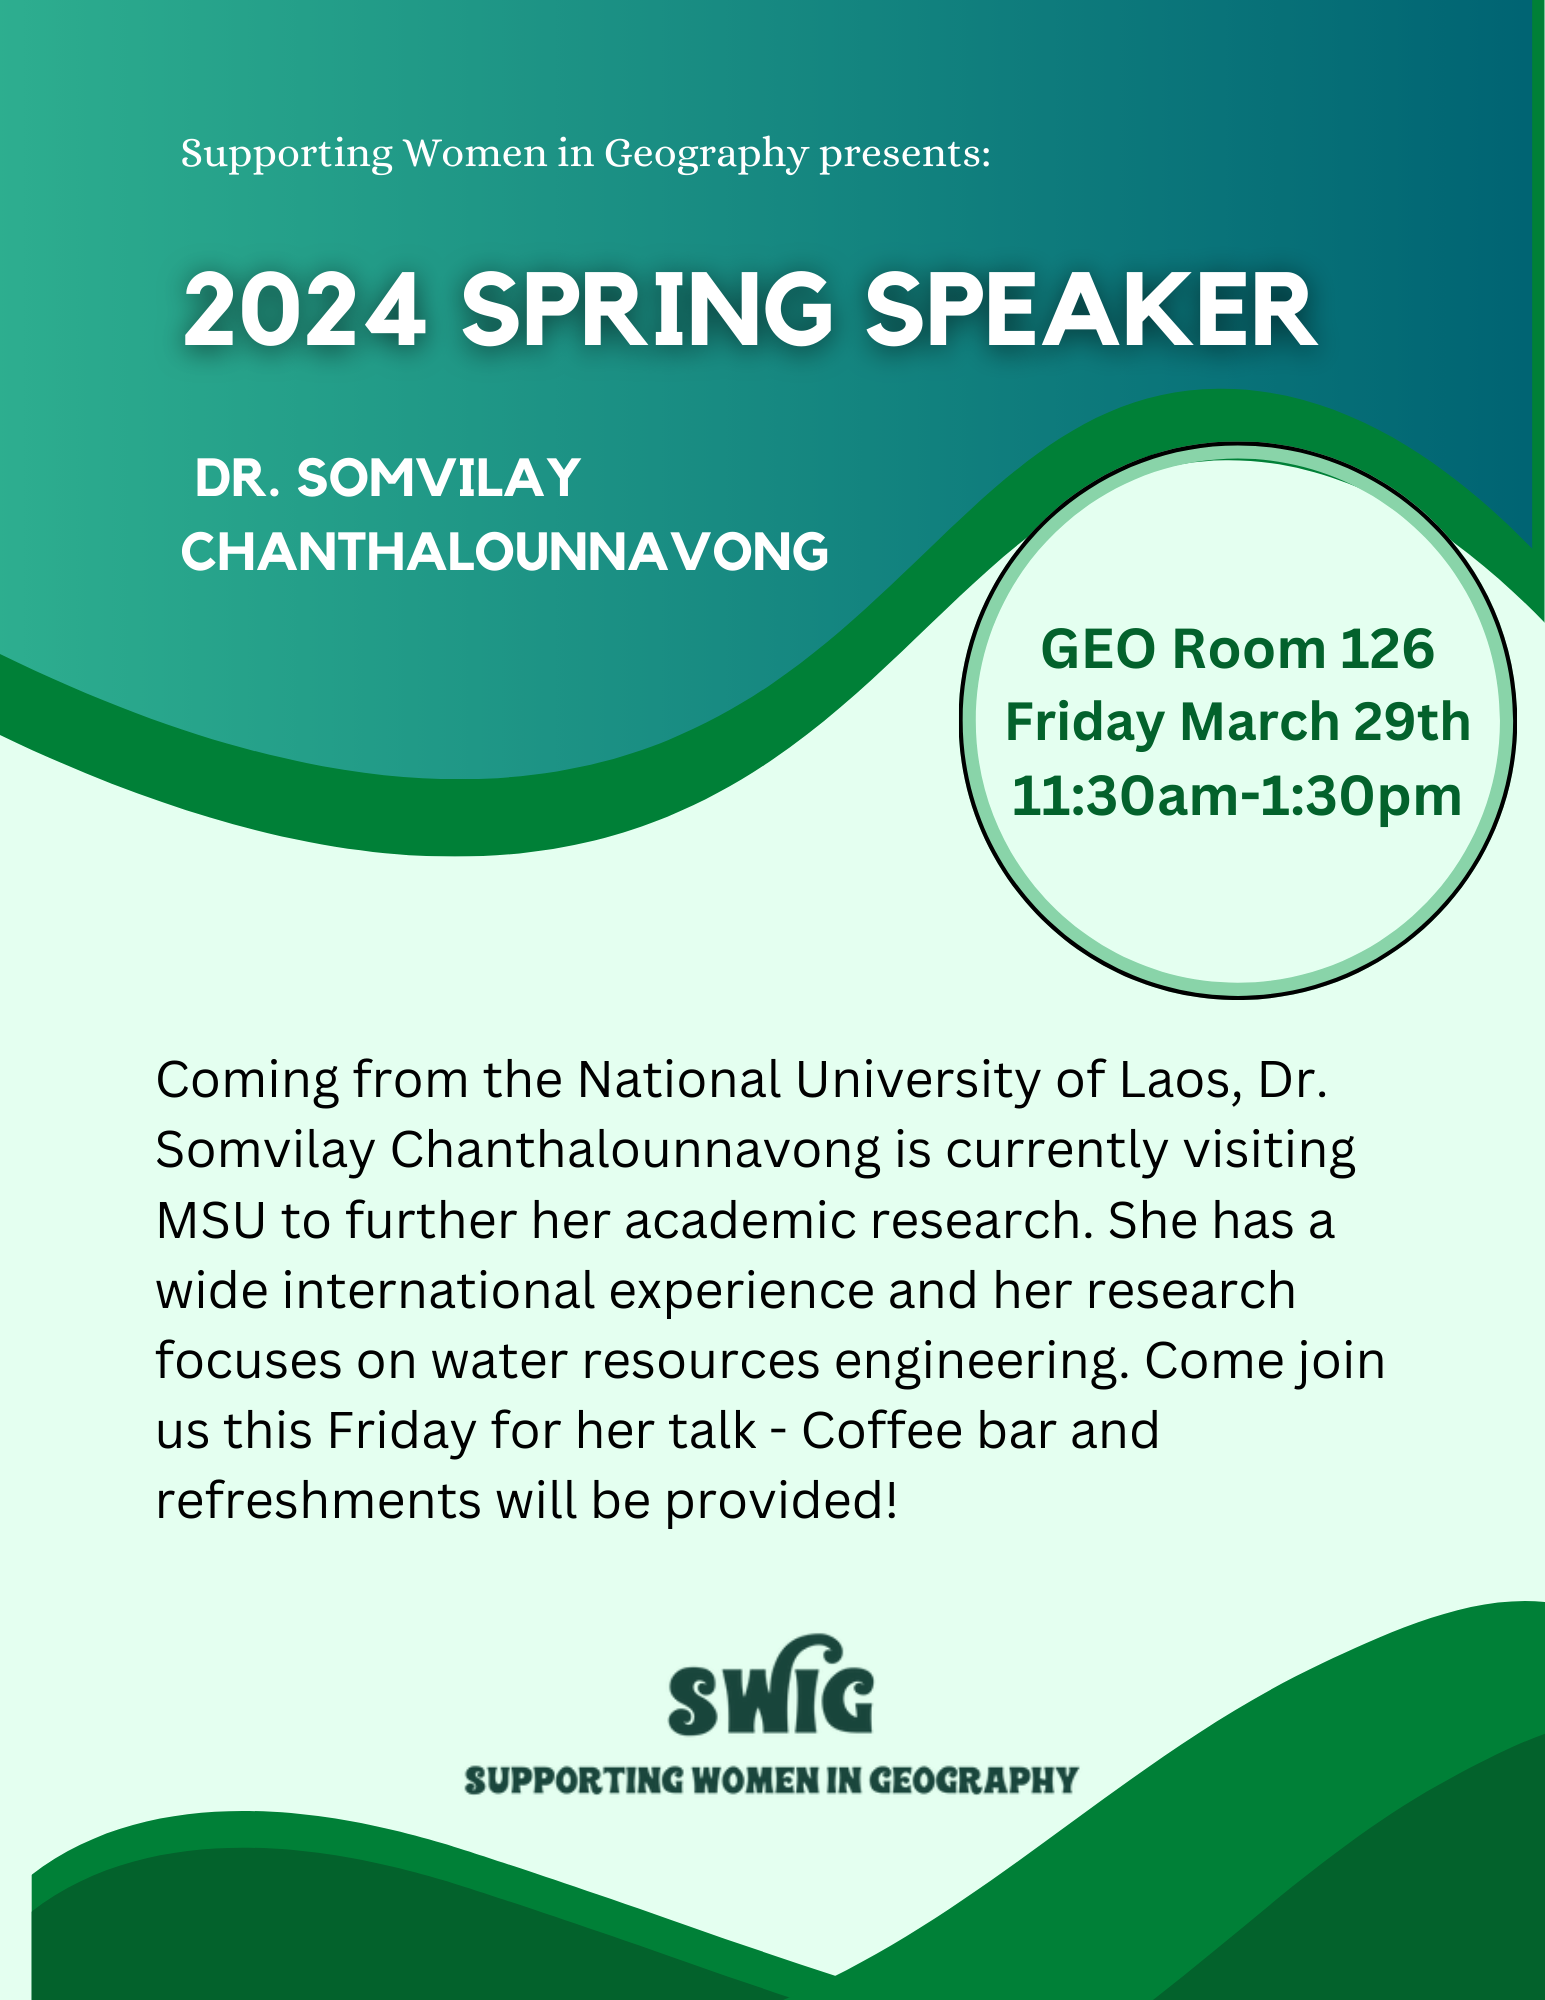 SWIG Dr. Chanthalounnavong event